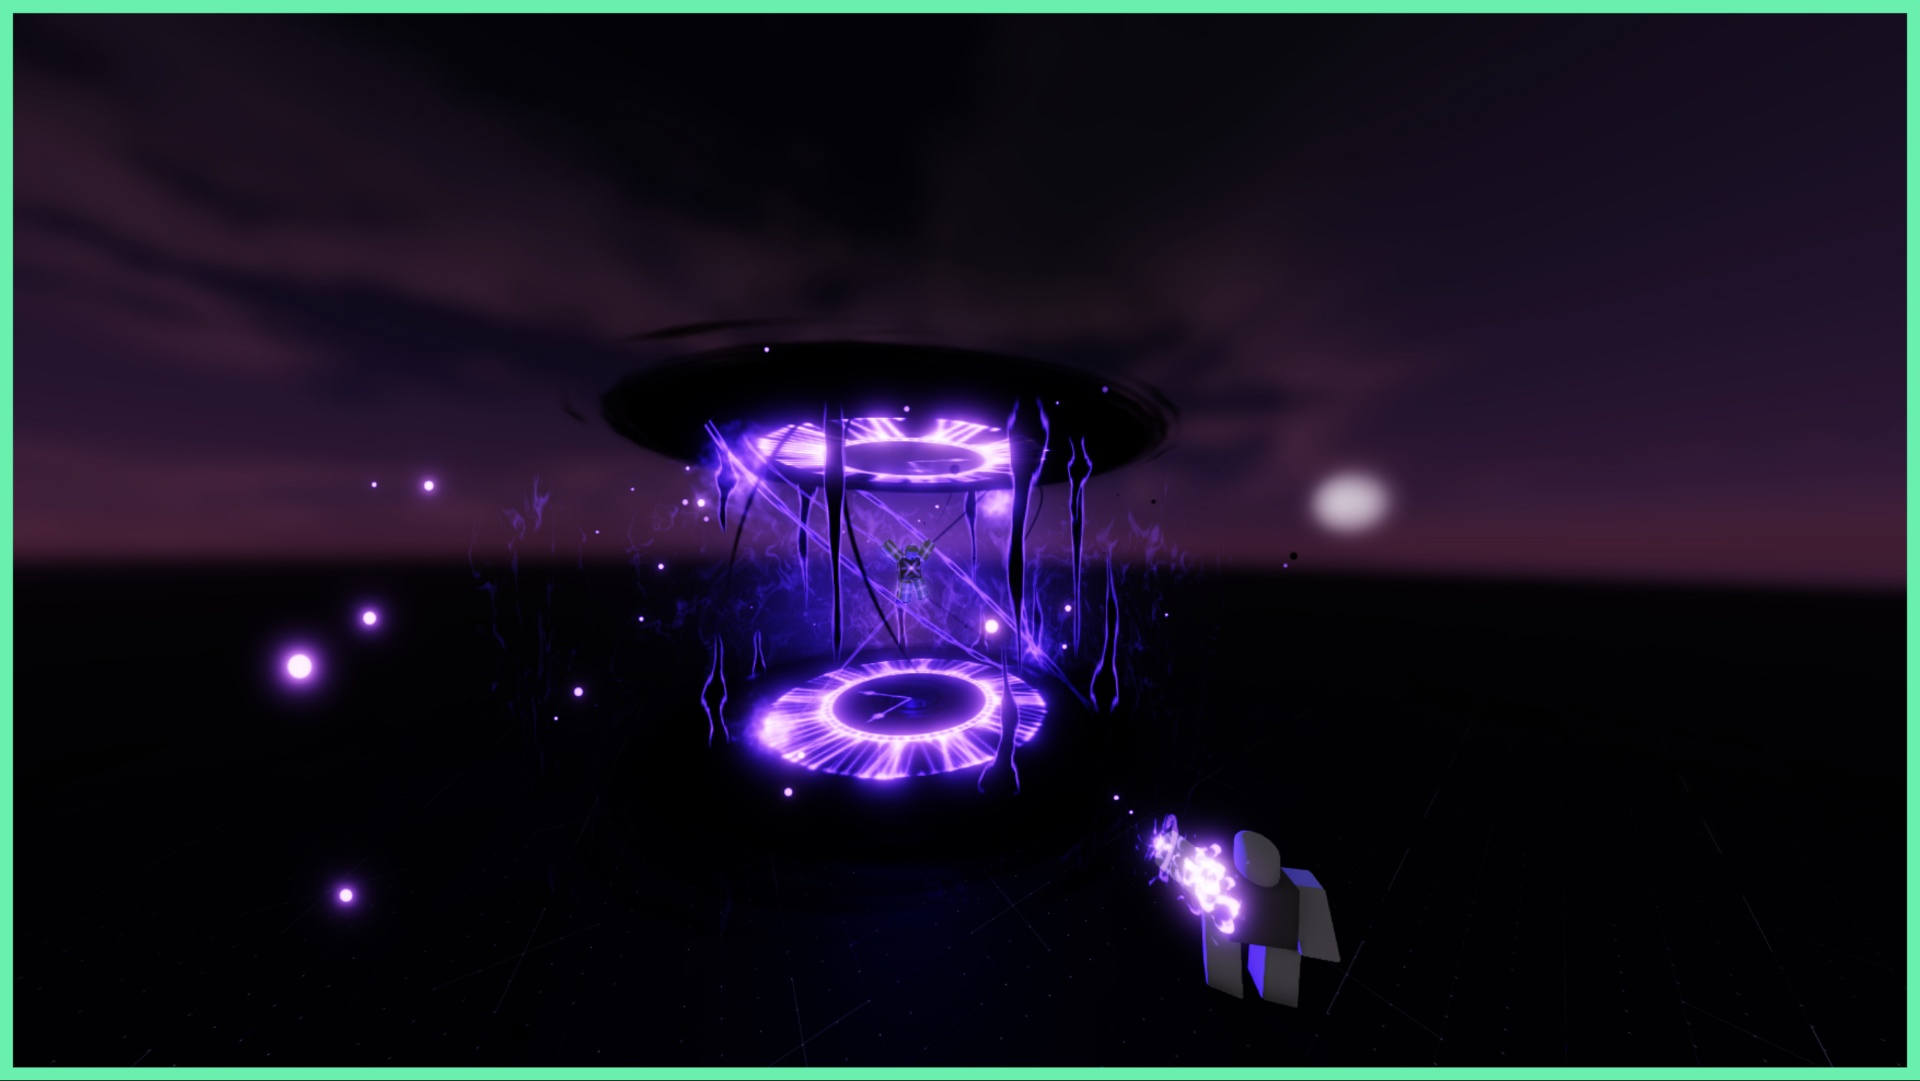 the image shows an ominous purple portal with a greyed out player casting it closer to bottom corner of the screen. In the centre of the portal is a bounded player